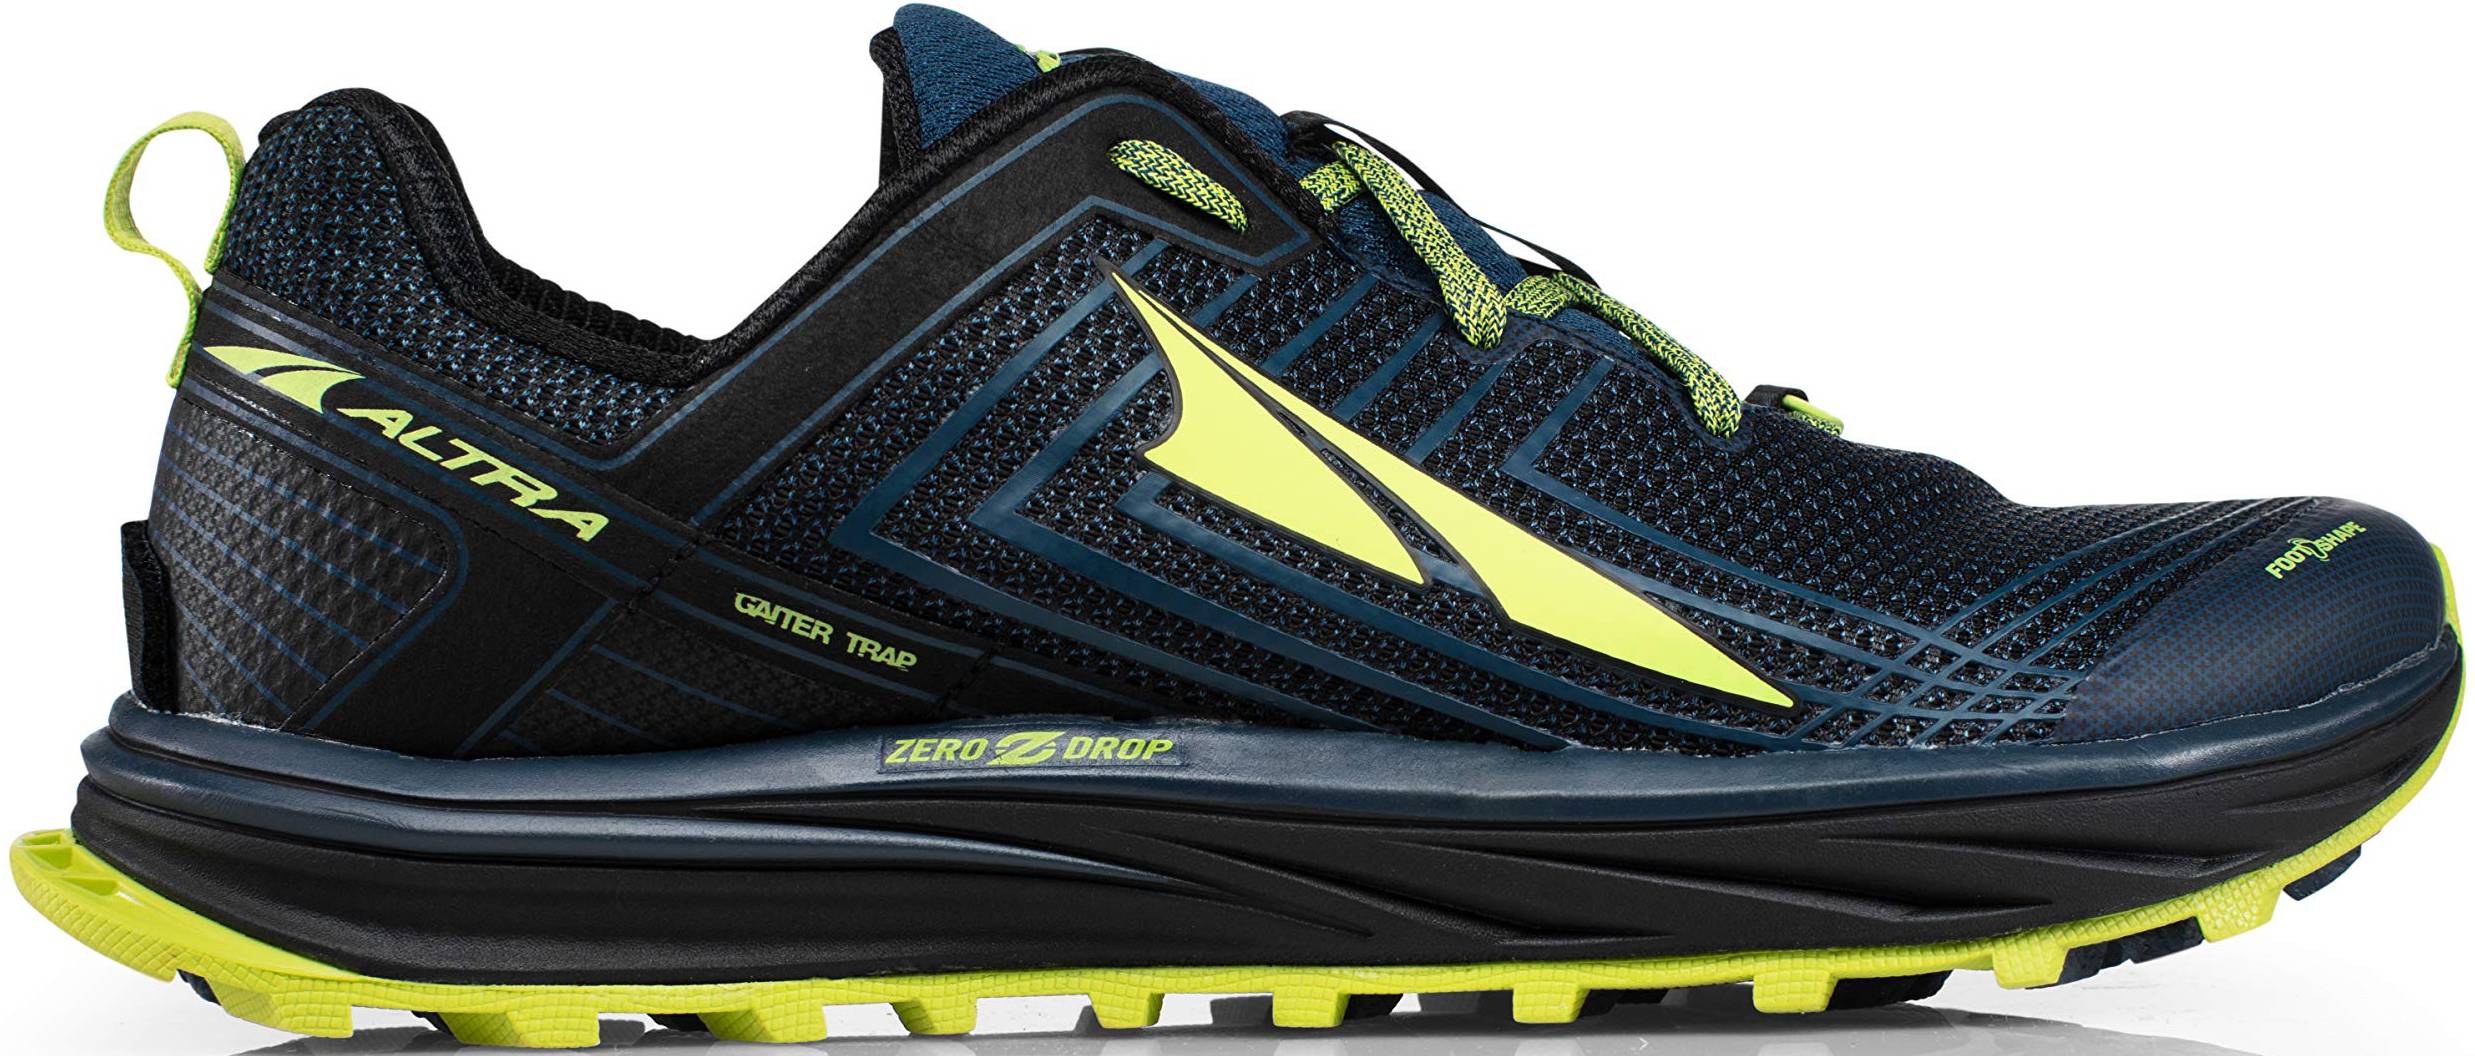 Save 61% on Altra Running Shoes (63 